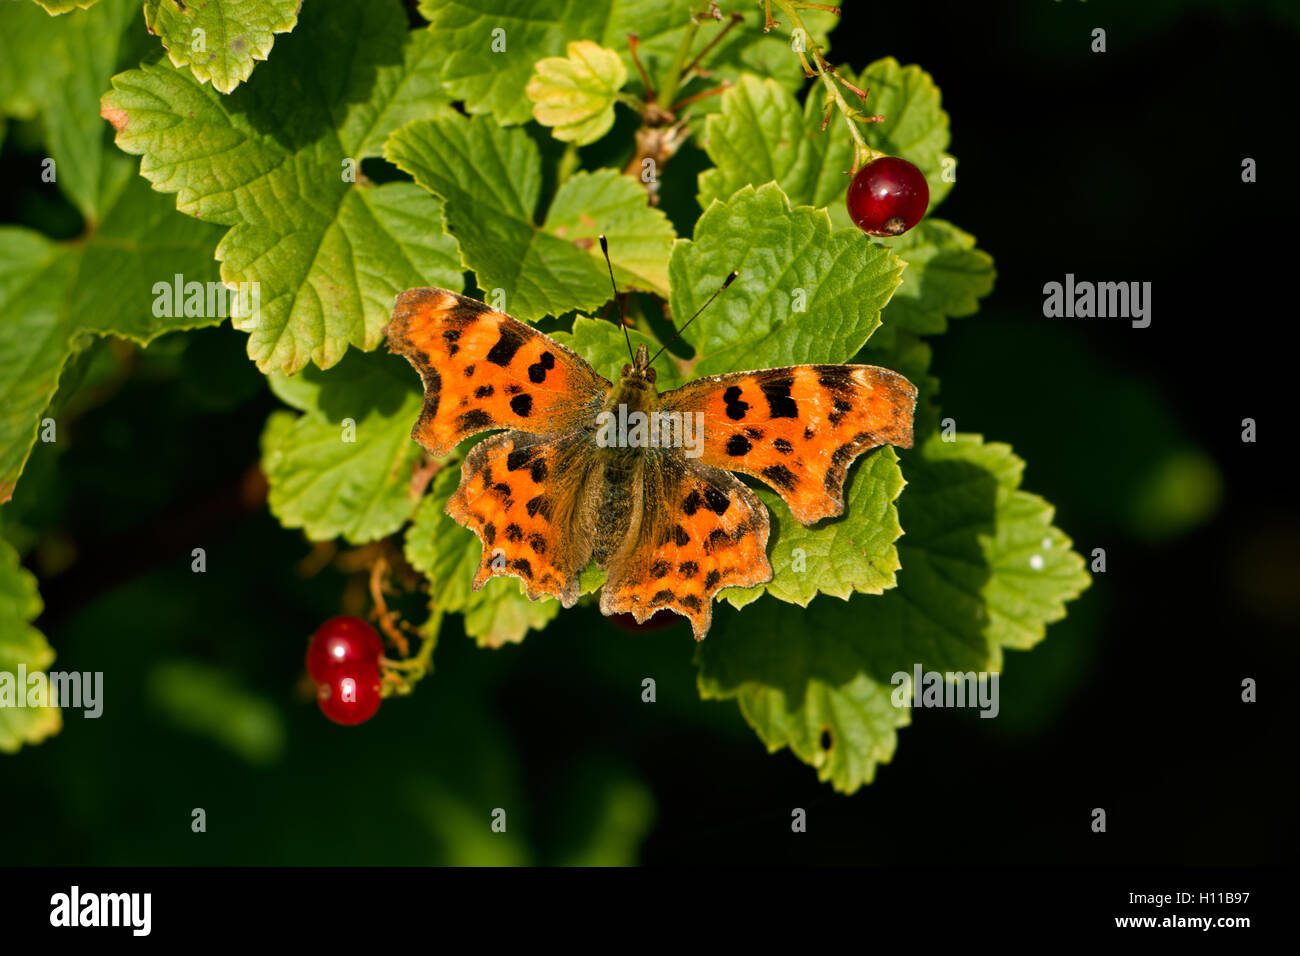 A Red Admiral butterfly perched upon a redcurrant bush in the central third of image